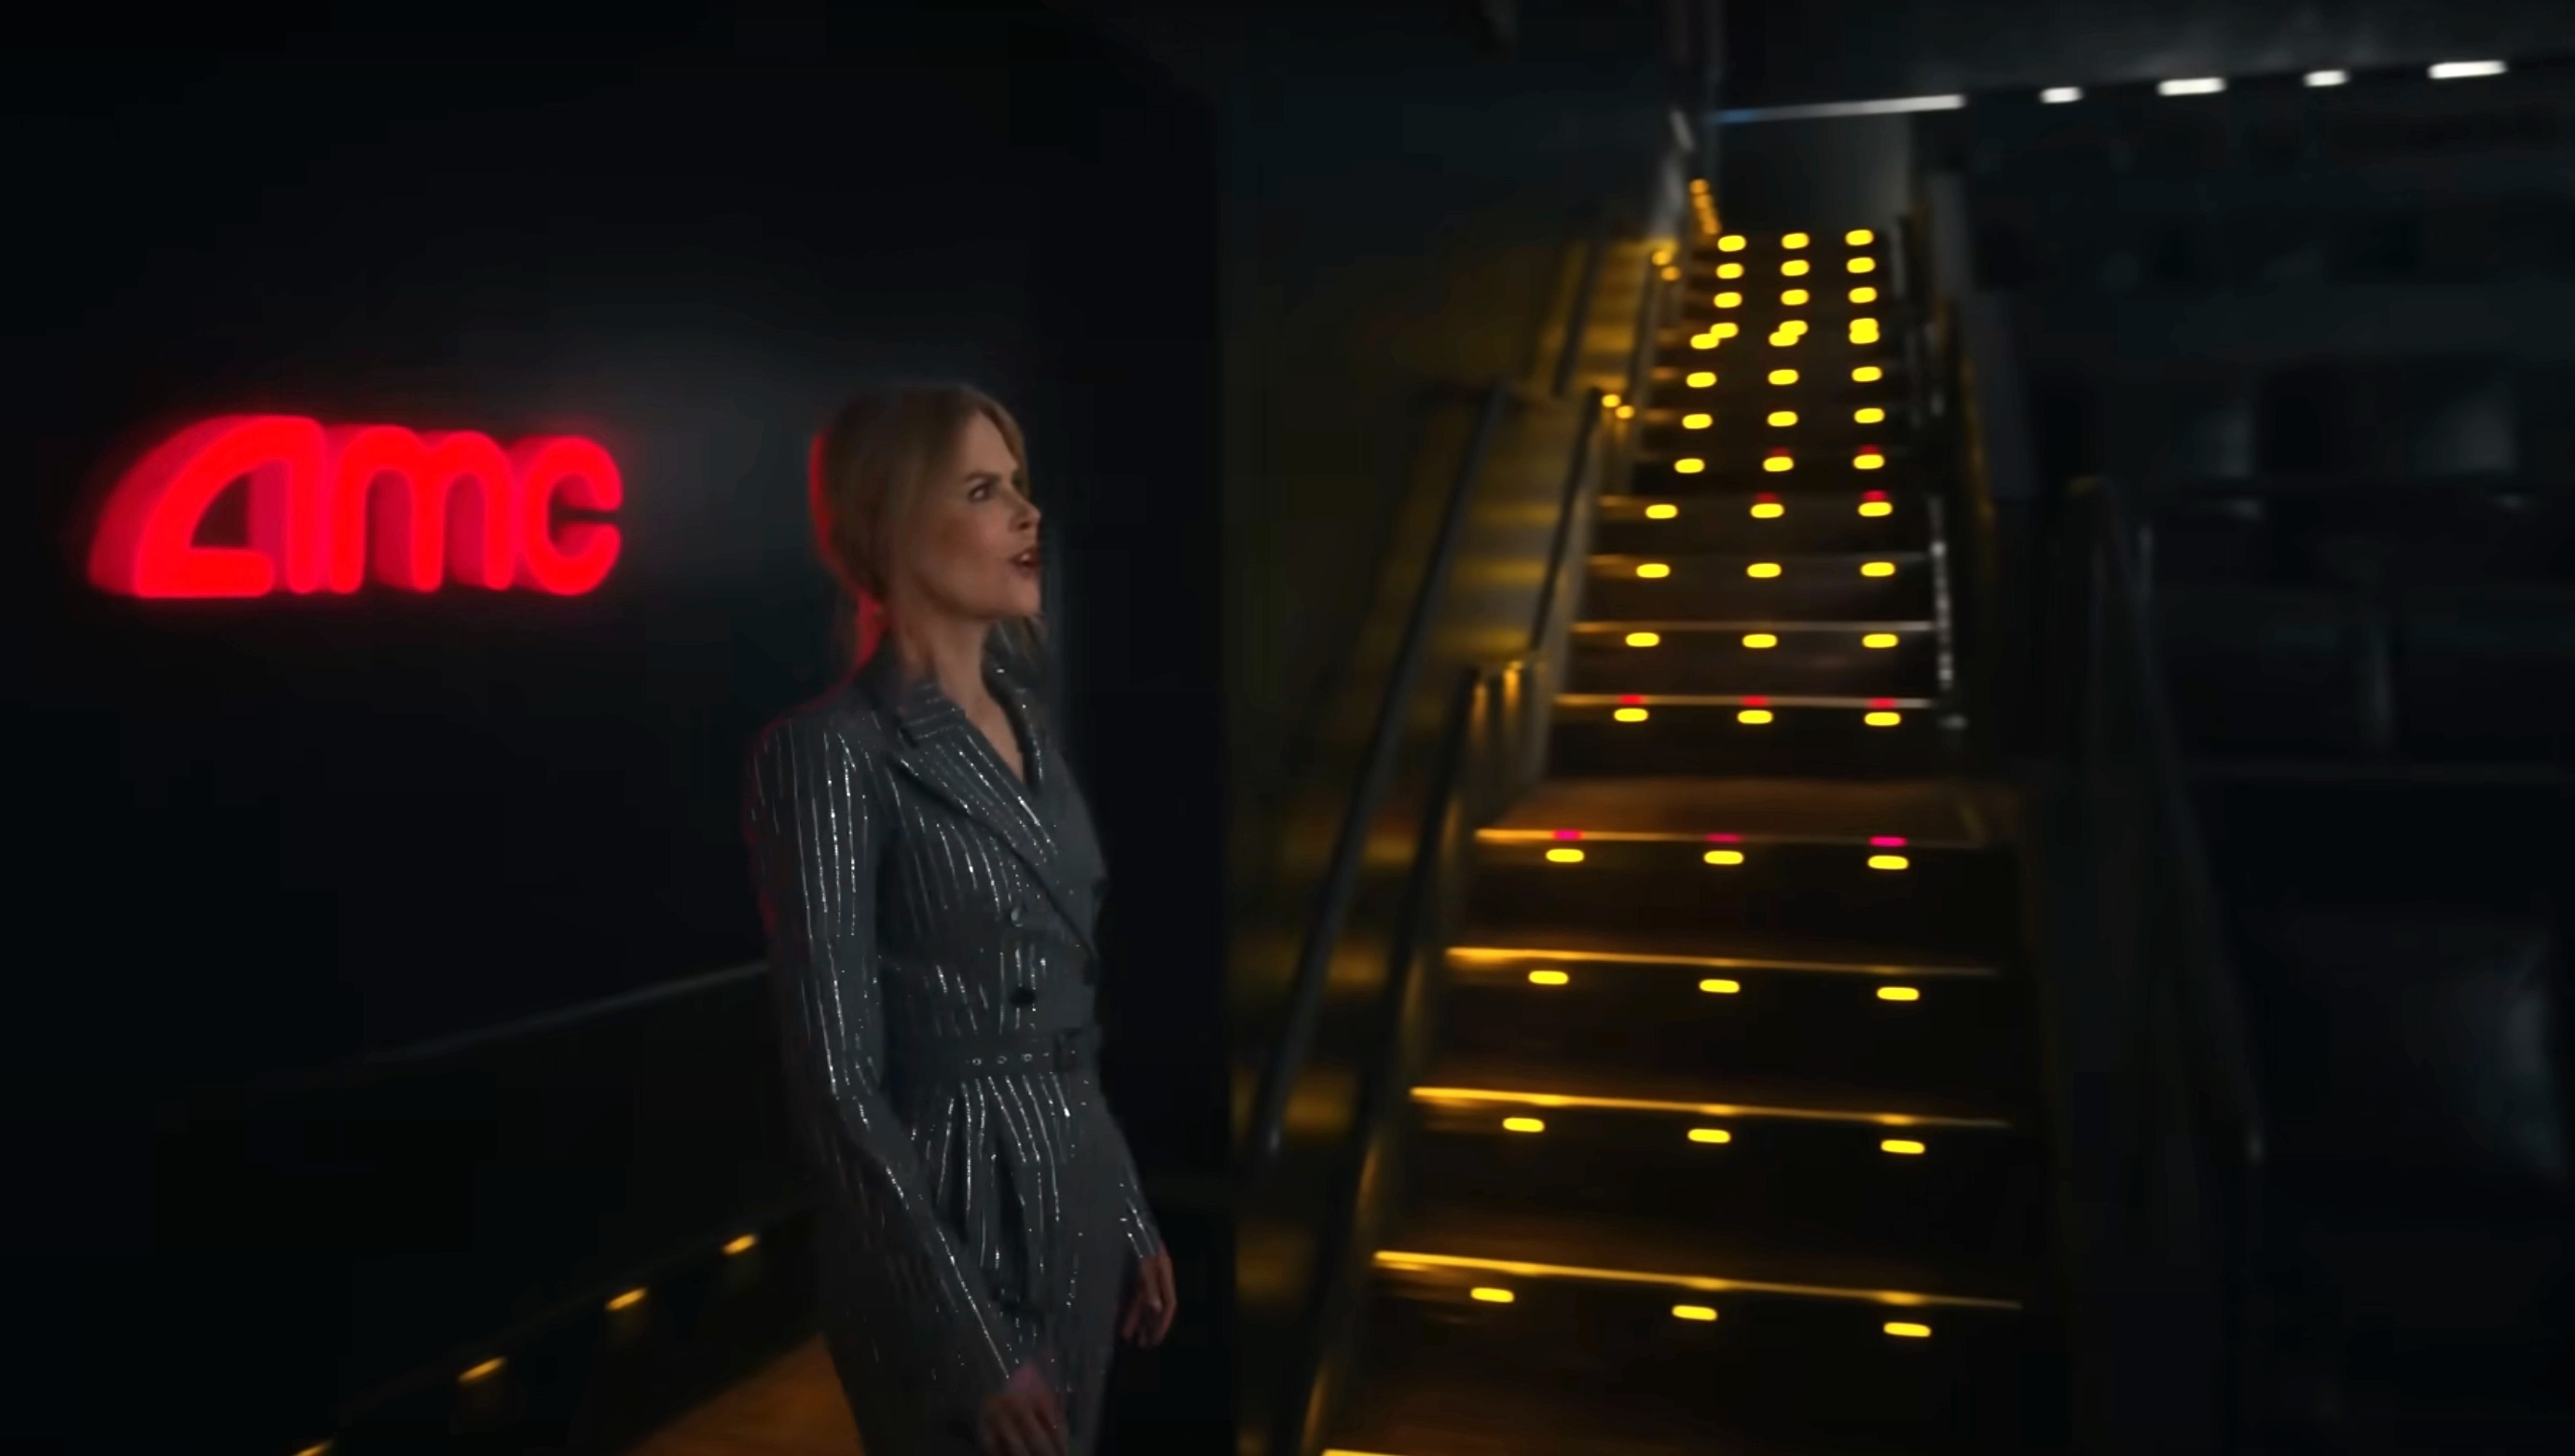 Nicole Kidman in a sparkling suit stands in a dimly lit AMC theater aisle beside illuminated stairs